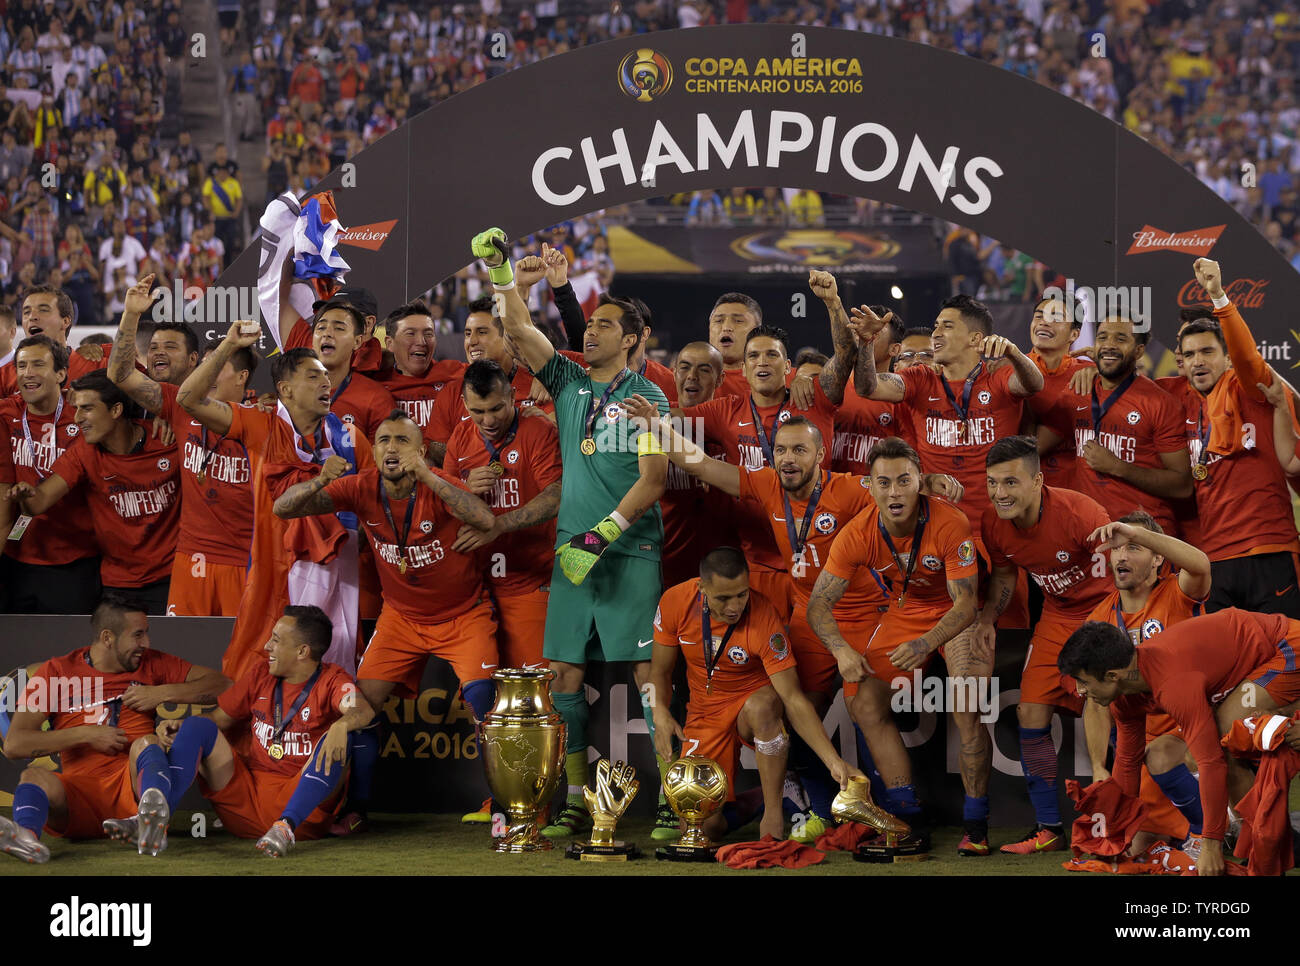 Chile goalkeeper Claudio Bravo (1) clenches his fist as his teammates celebrate after beating Argentina in the penalty kicks phase at the Copa America Centenario USA 2016 Finals at MetLife Stadium in East Rutherford, New Jersey on June 26, 2016.      Photo by Ray Stubblebine/UPI Stock Photo